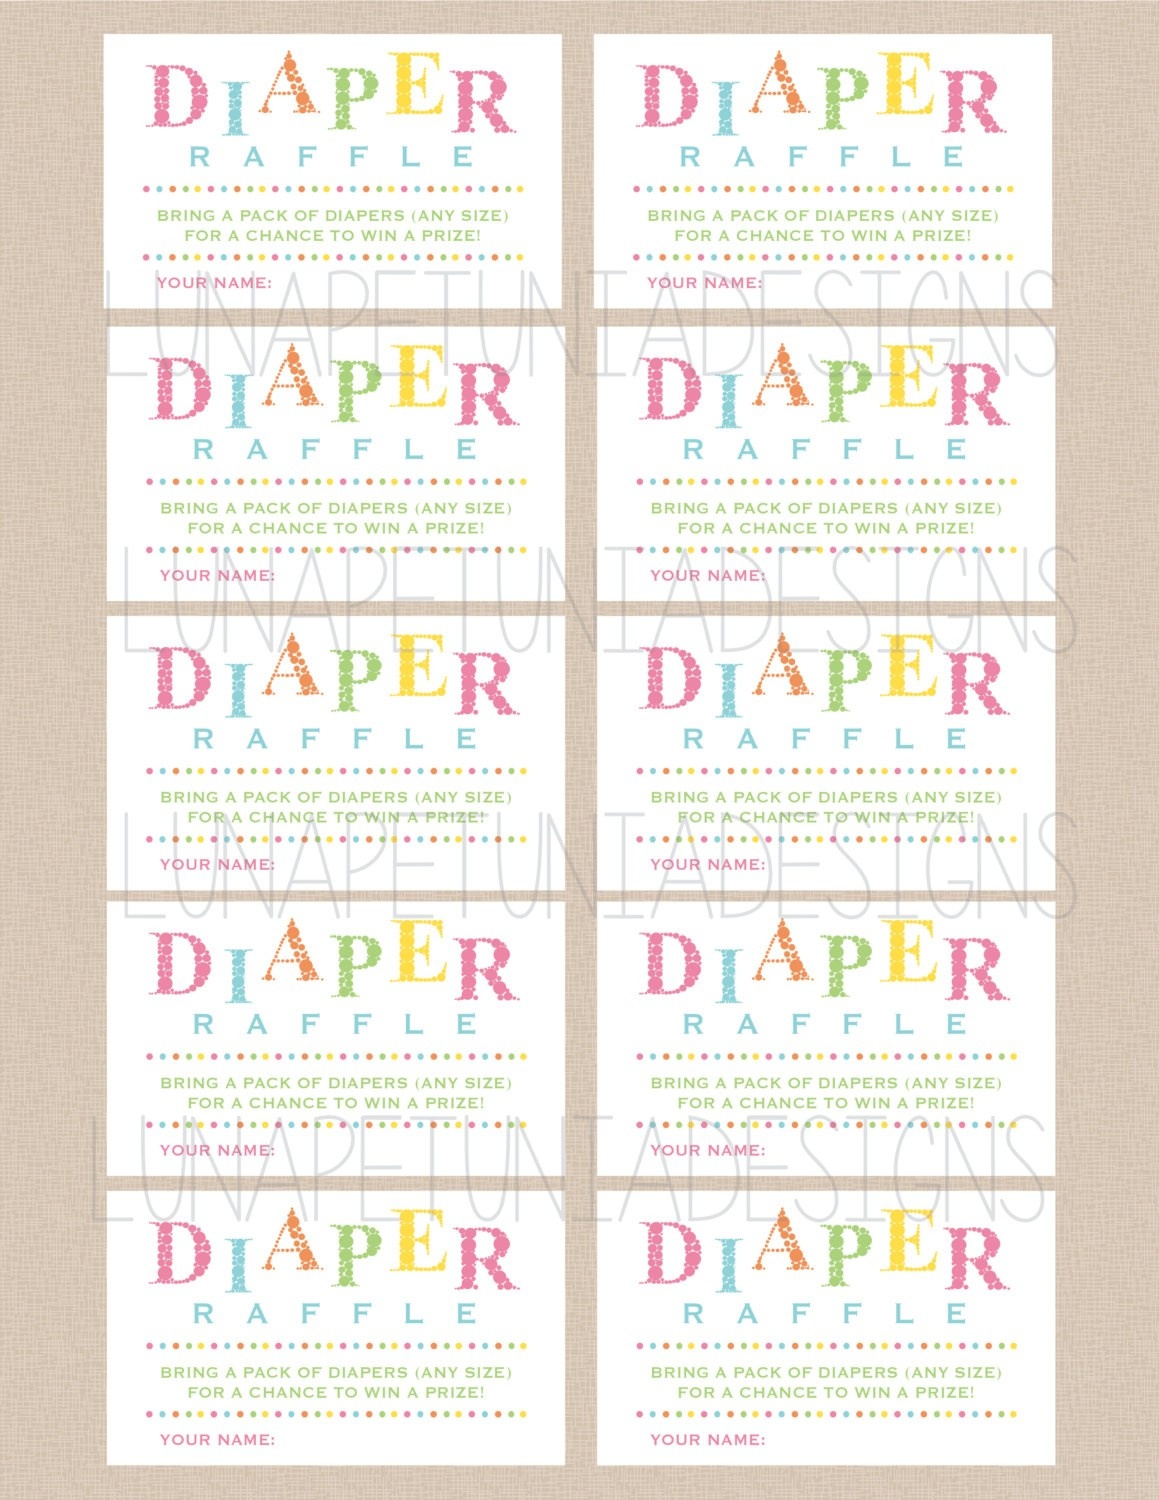 Review Free Printable Diaper Raffle Tickets For Baby Shower - Ideas - Diaper Raffle Free Printable